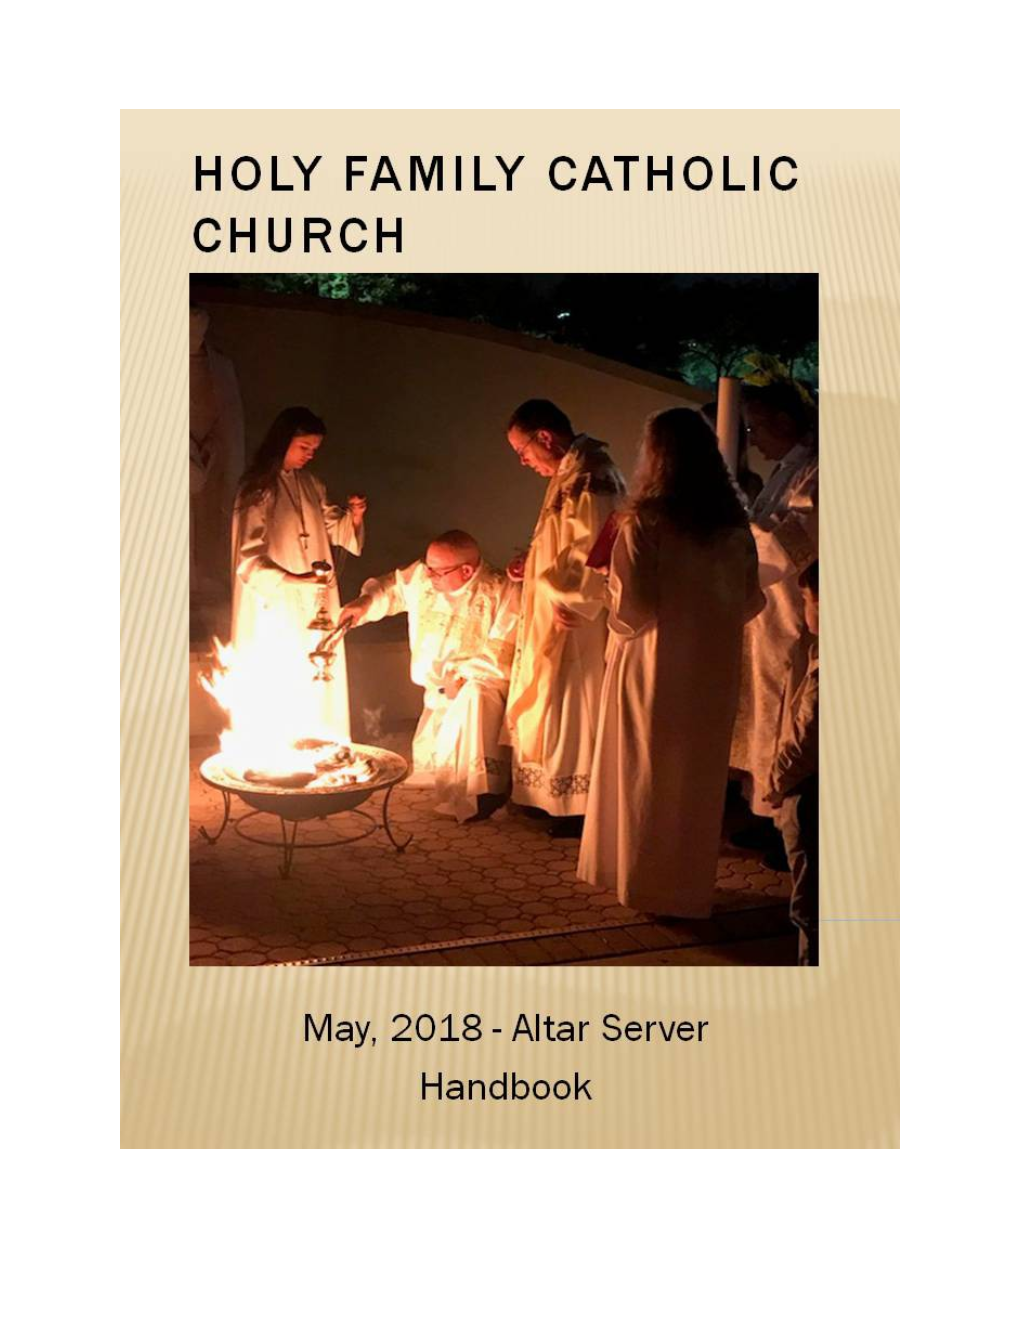 About Altar Servers